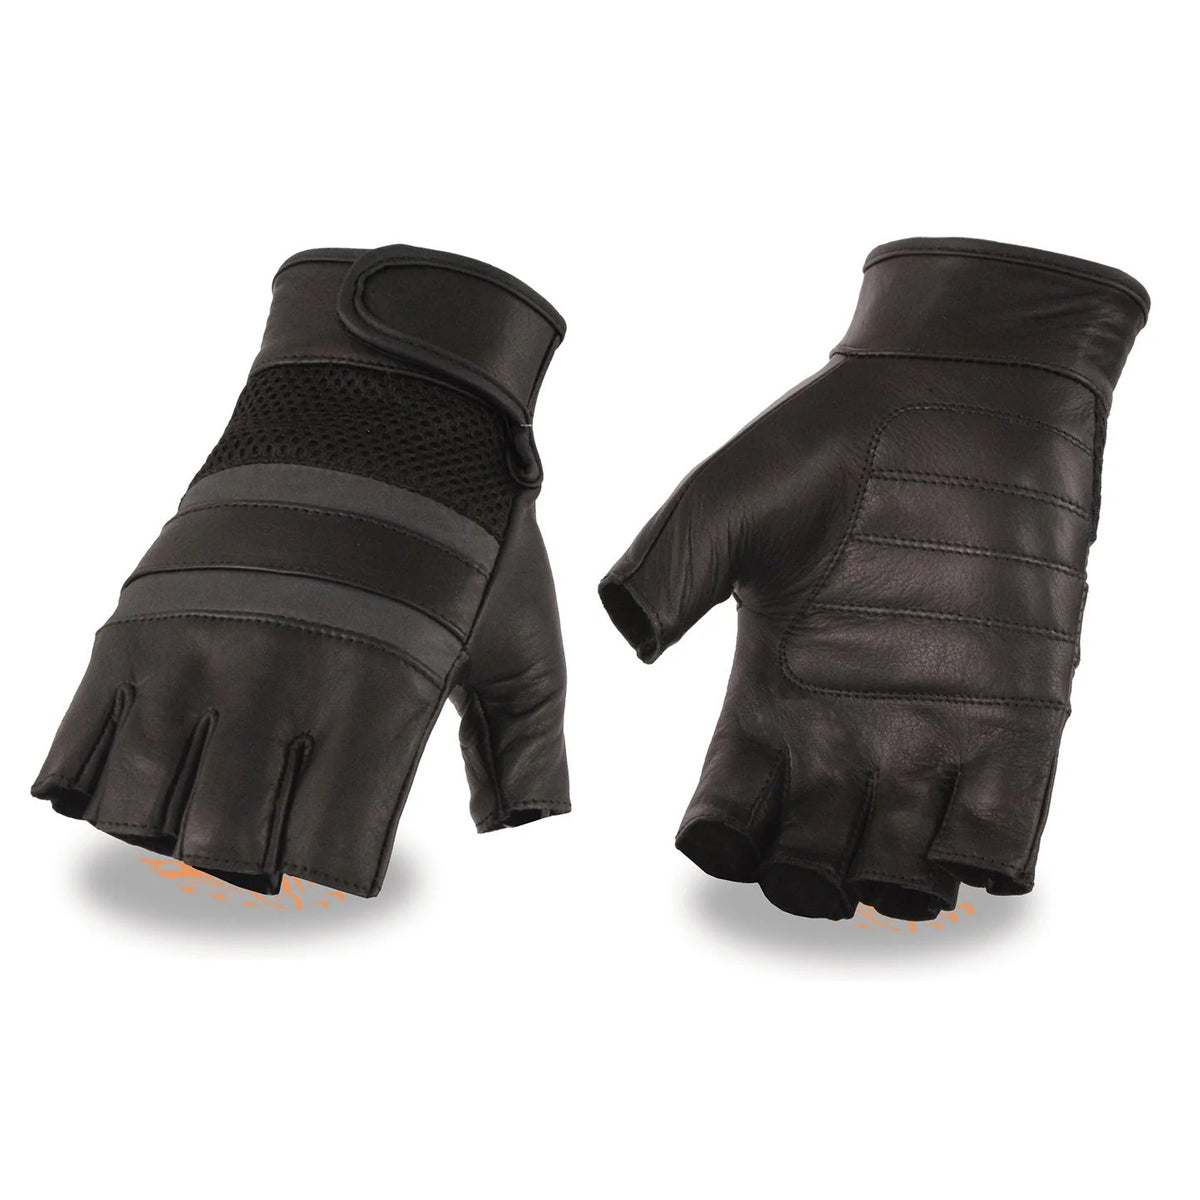 Men's Black Leather Mesh Gel Palm Fingerless Motorcycle Hand Gloves W/ ‘Reflective Bands’